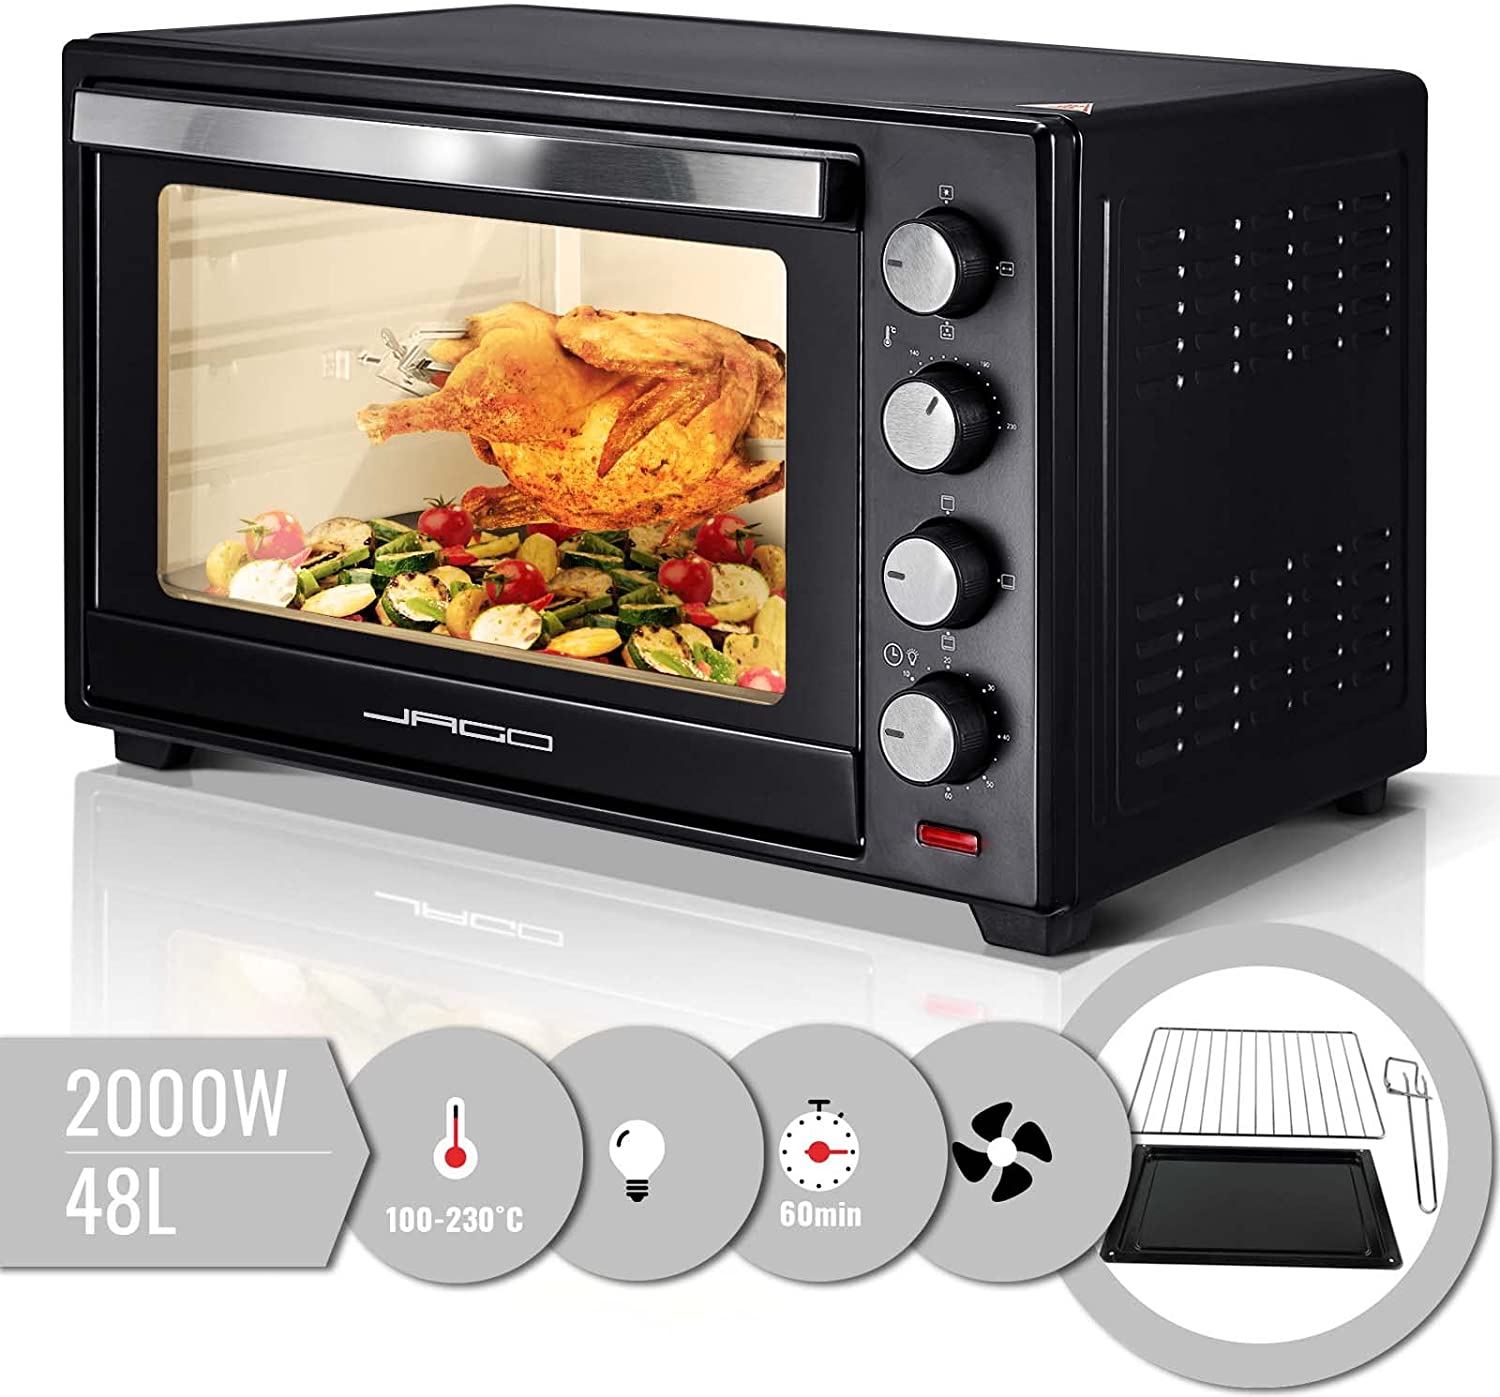 Jago® Mini Oven with Recirculation - Interior Lighting, Electric, Double Glass Door, Timer, 100-230°, 2000W, 48L, 5 Heat Types, Rotisserie Spit, Black - Mini Oven, Mini Kitchen, Barbecue, Pizza Oven